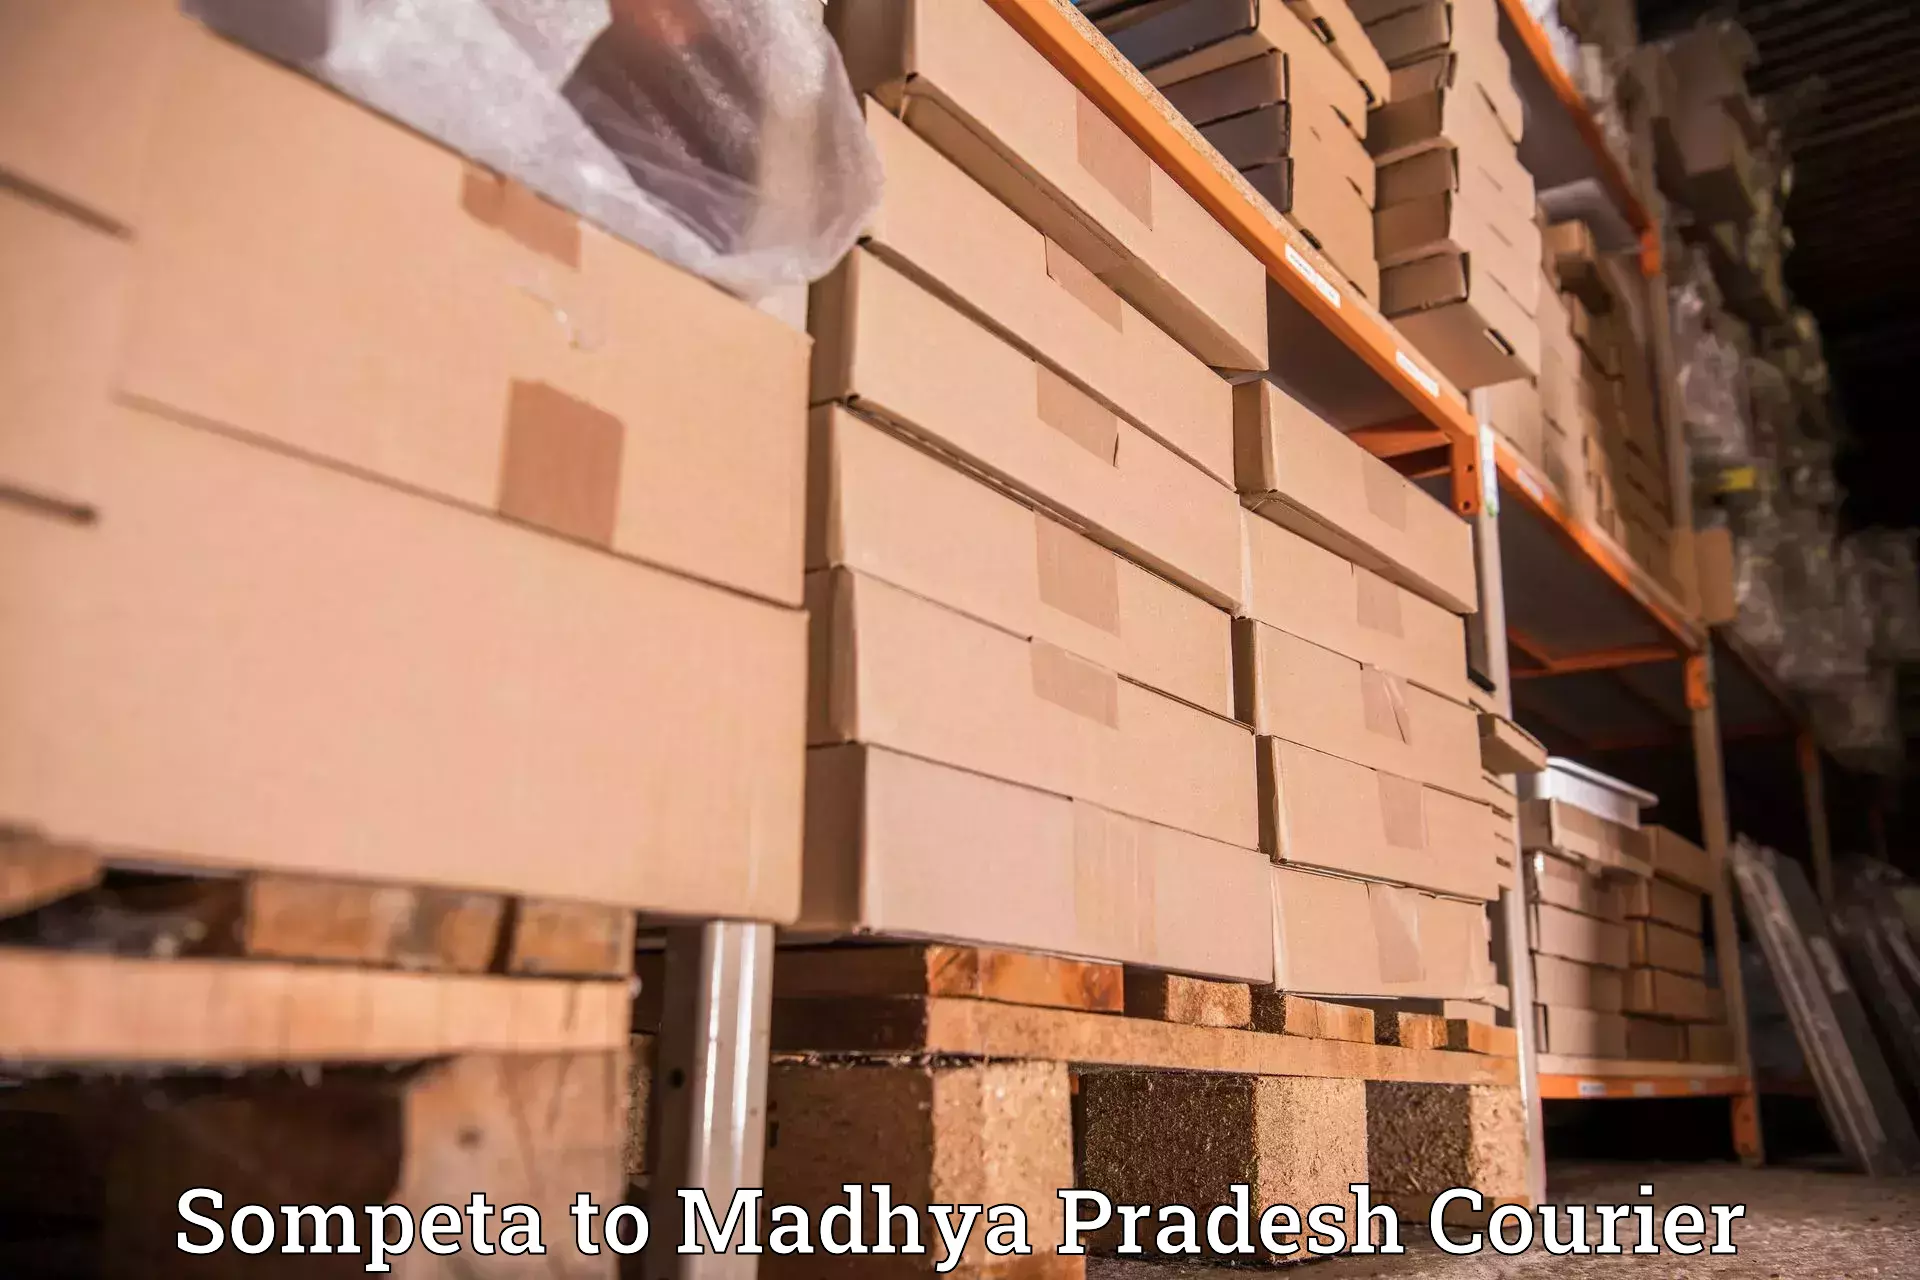 24-hour courier service Sompeta to IIIT Bhopal